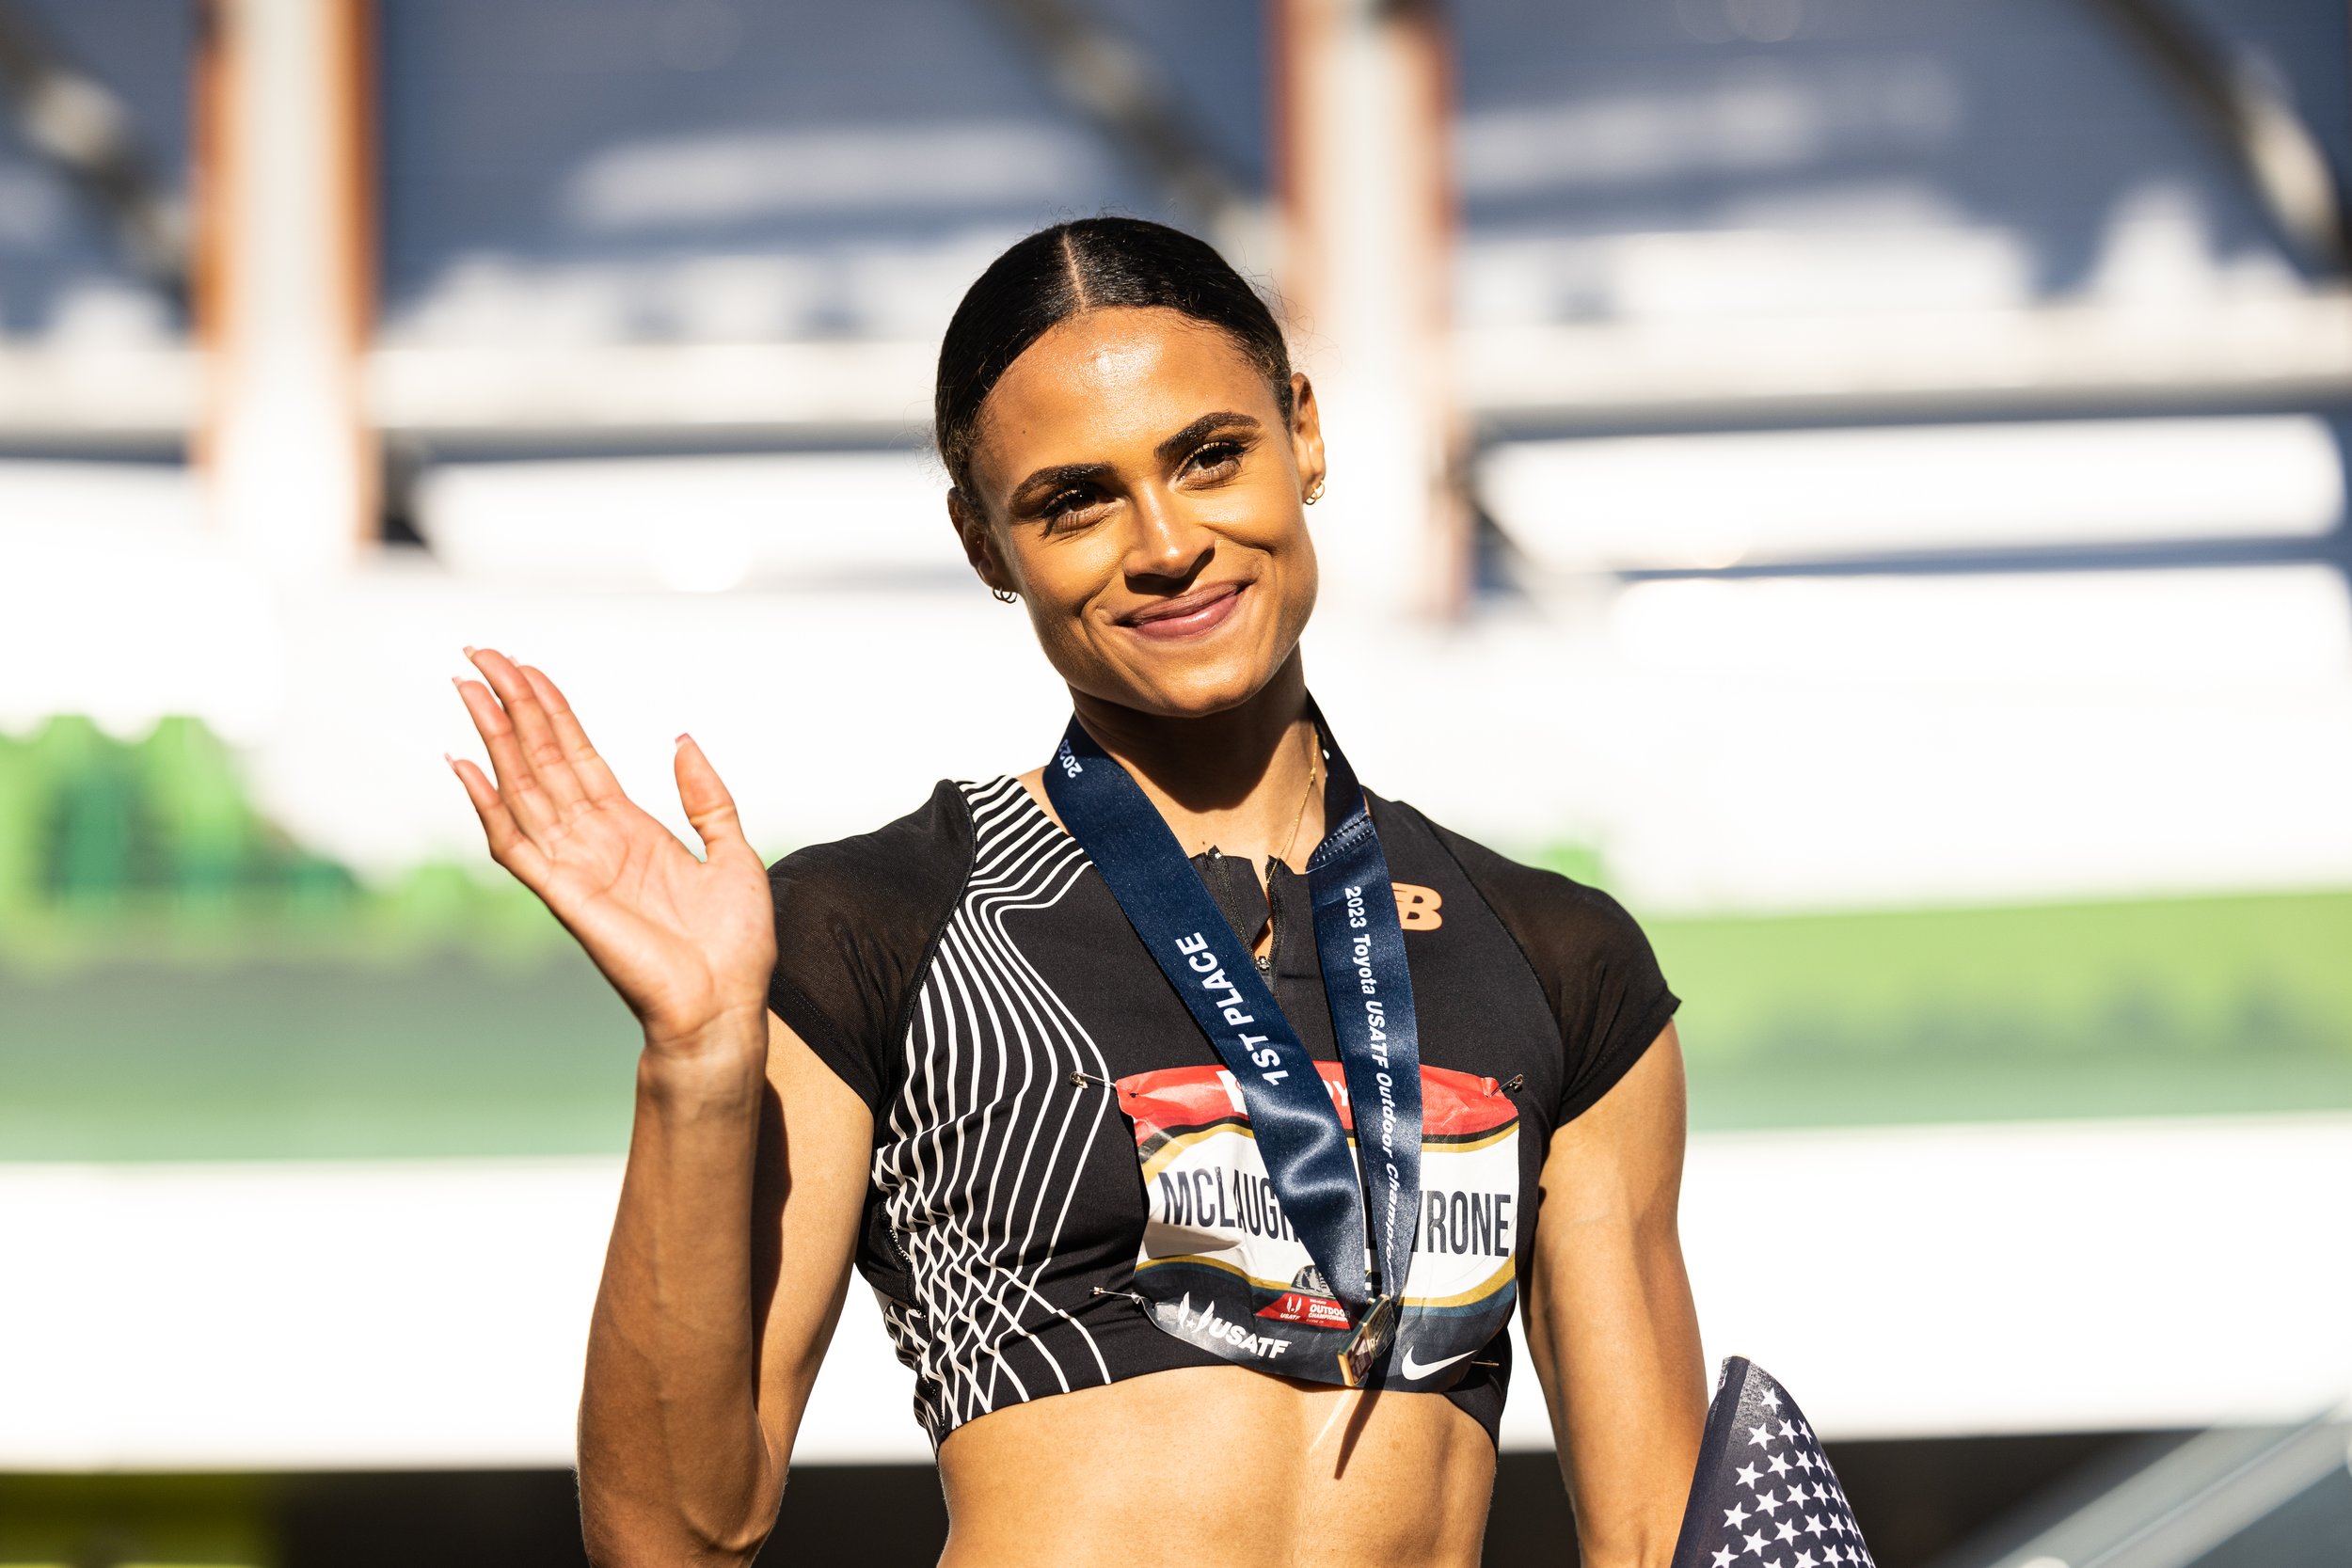 Sydney McLaughlin-Levrone coasts to 400 win at US track and field